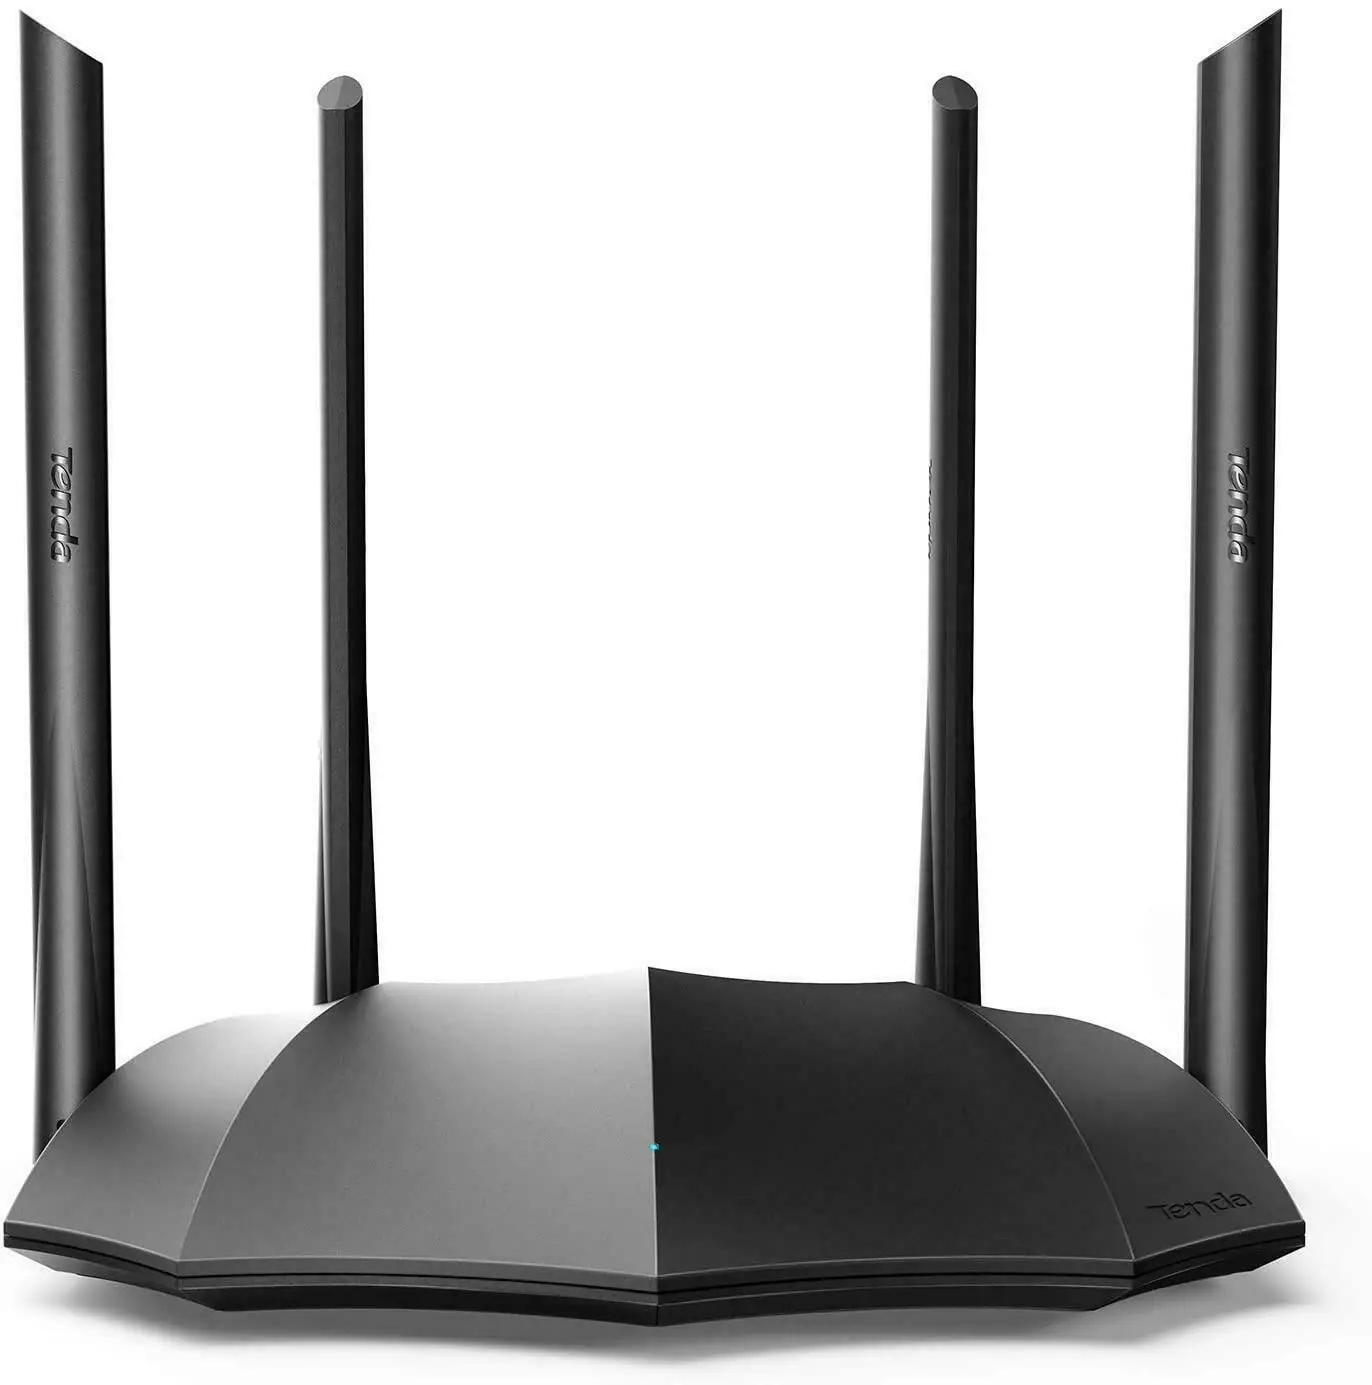 

Tenda AC8 Gigabit Router Dual Band 2.4GHz 5GHz WiFi 1167Mbps Wi-Fi Repeater 128MB DDR3 High Gain 4 Antennas Network Extender